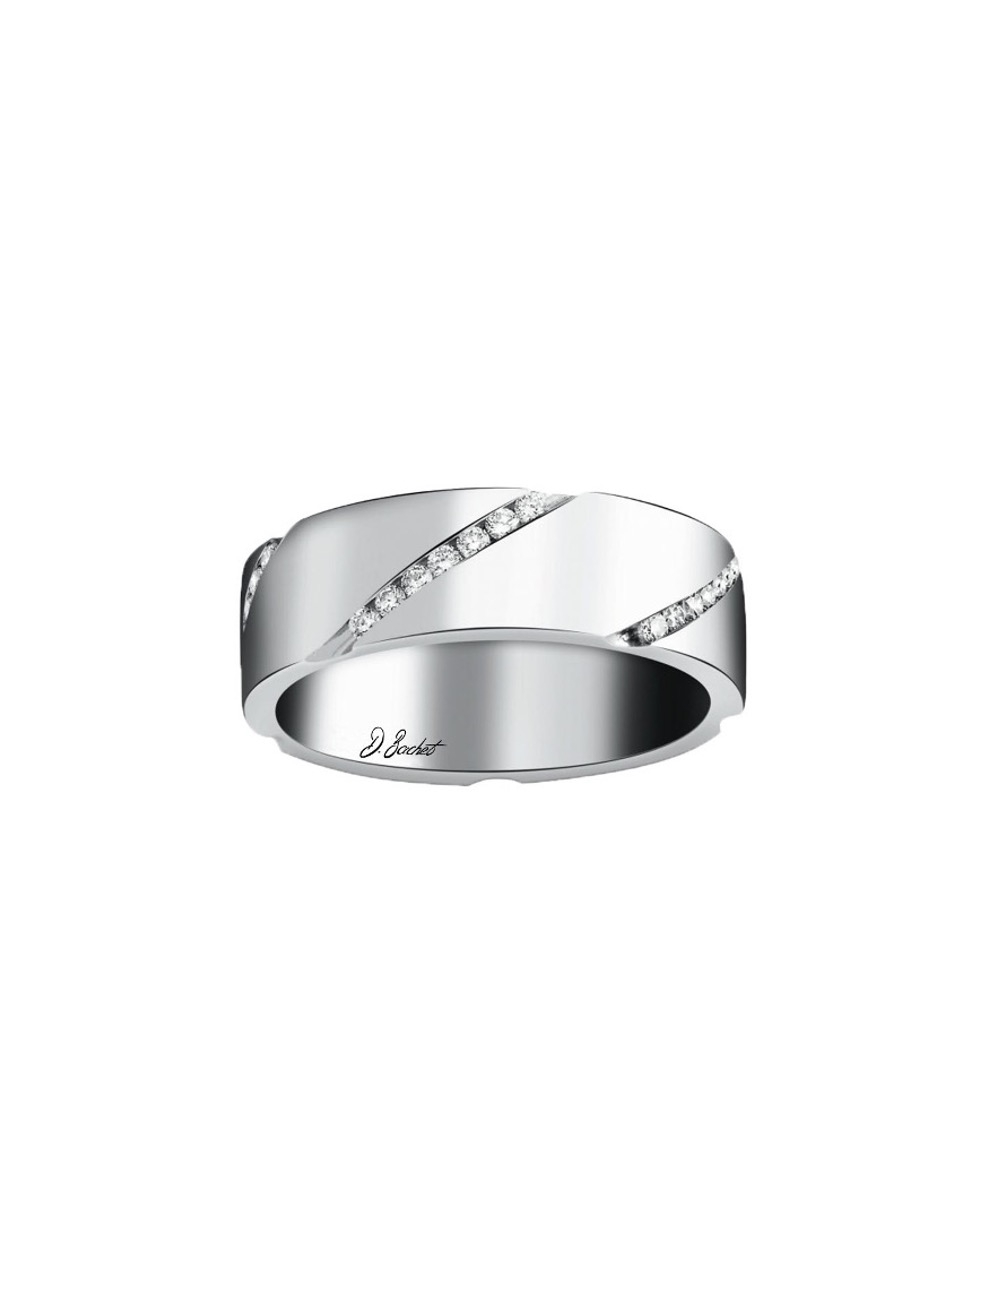 A women's wedding ring modern and original in platinum and white diamonds